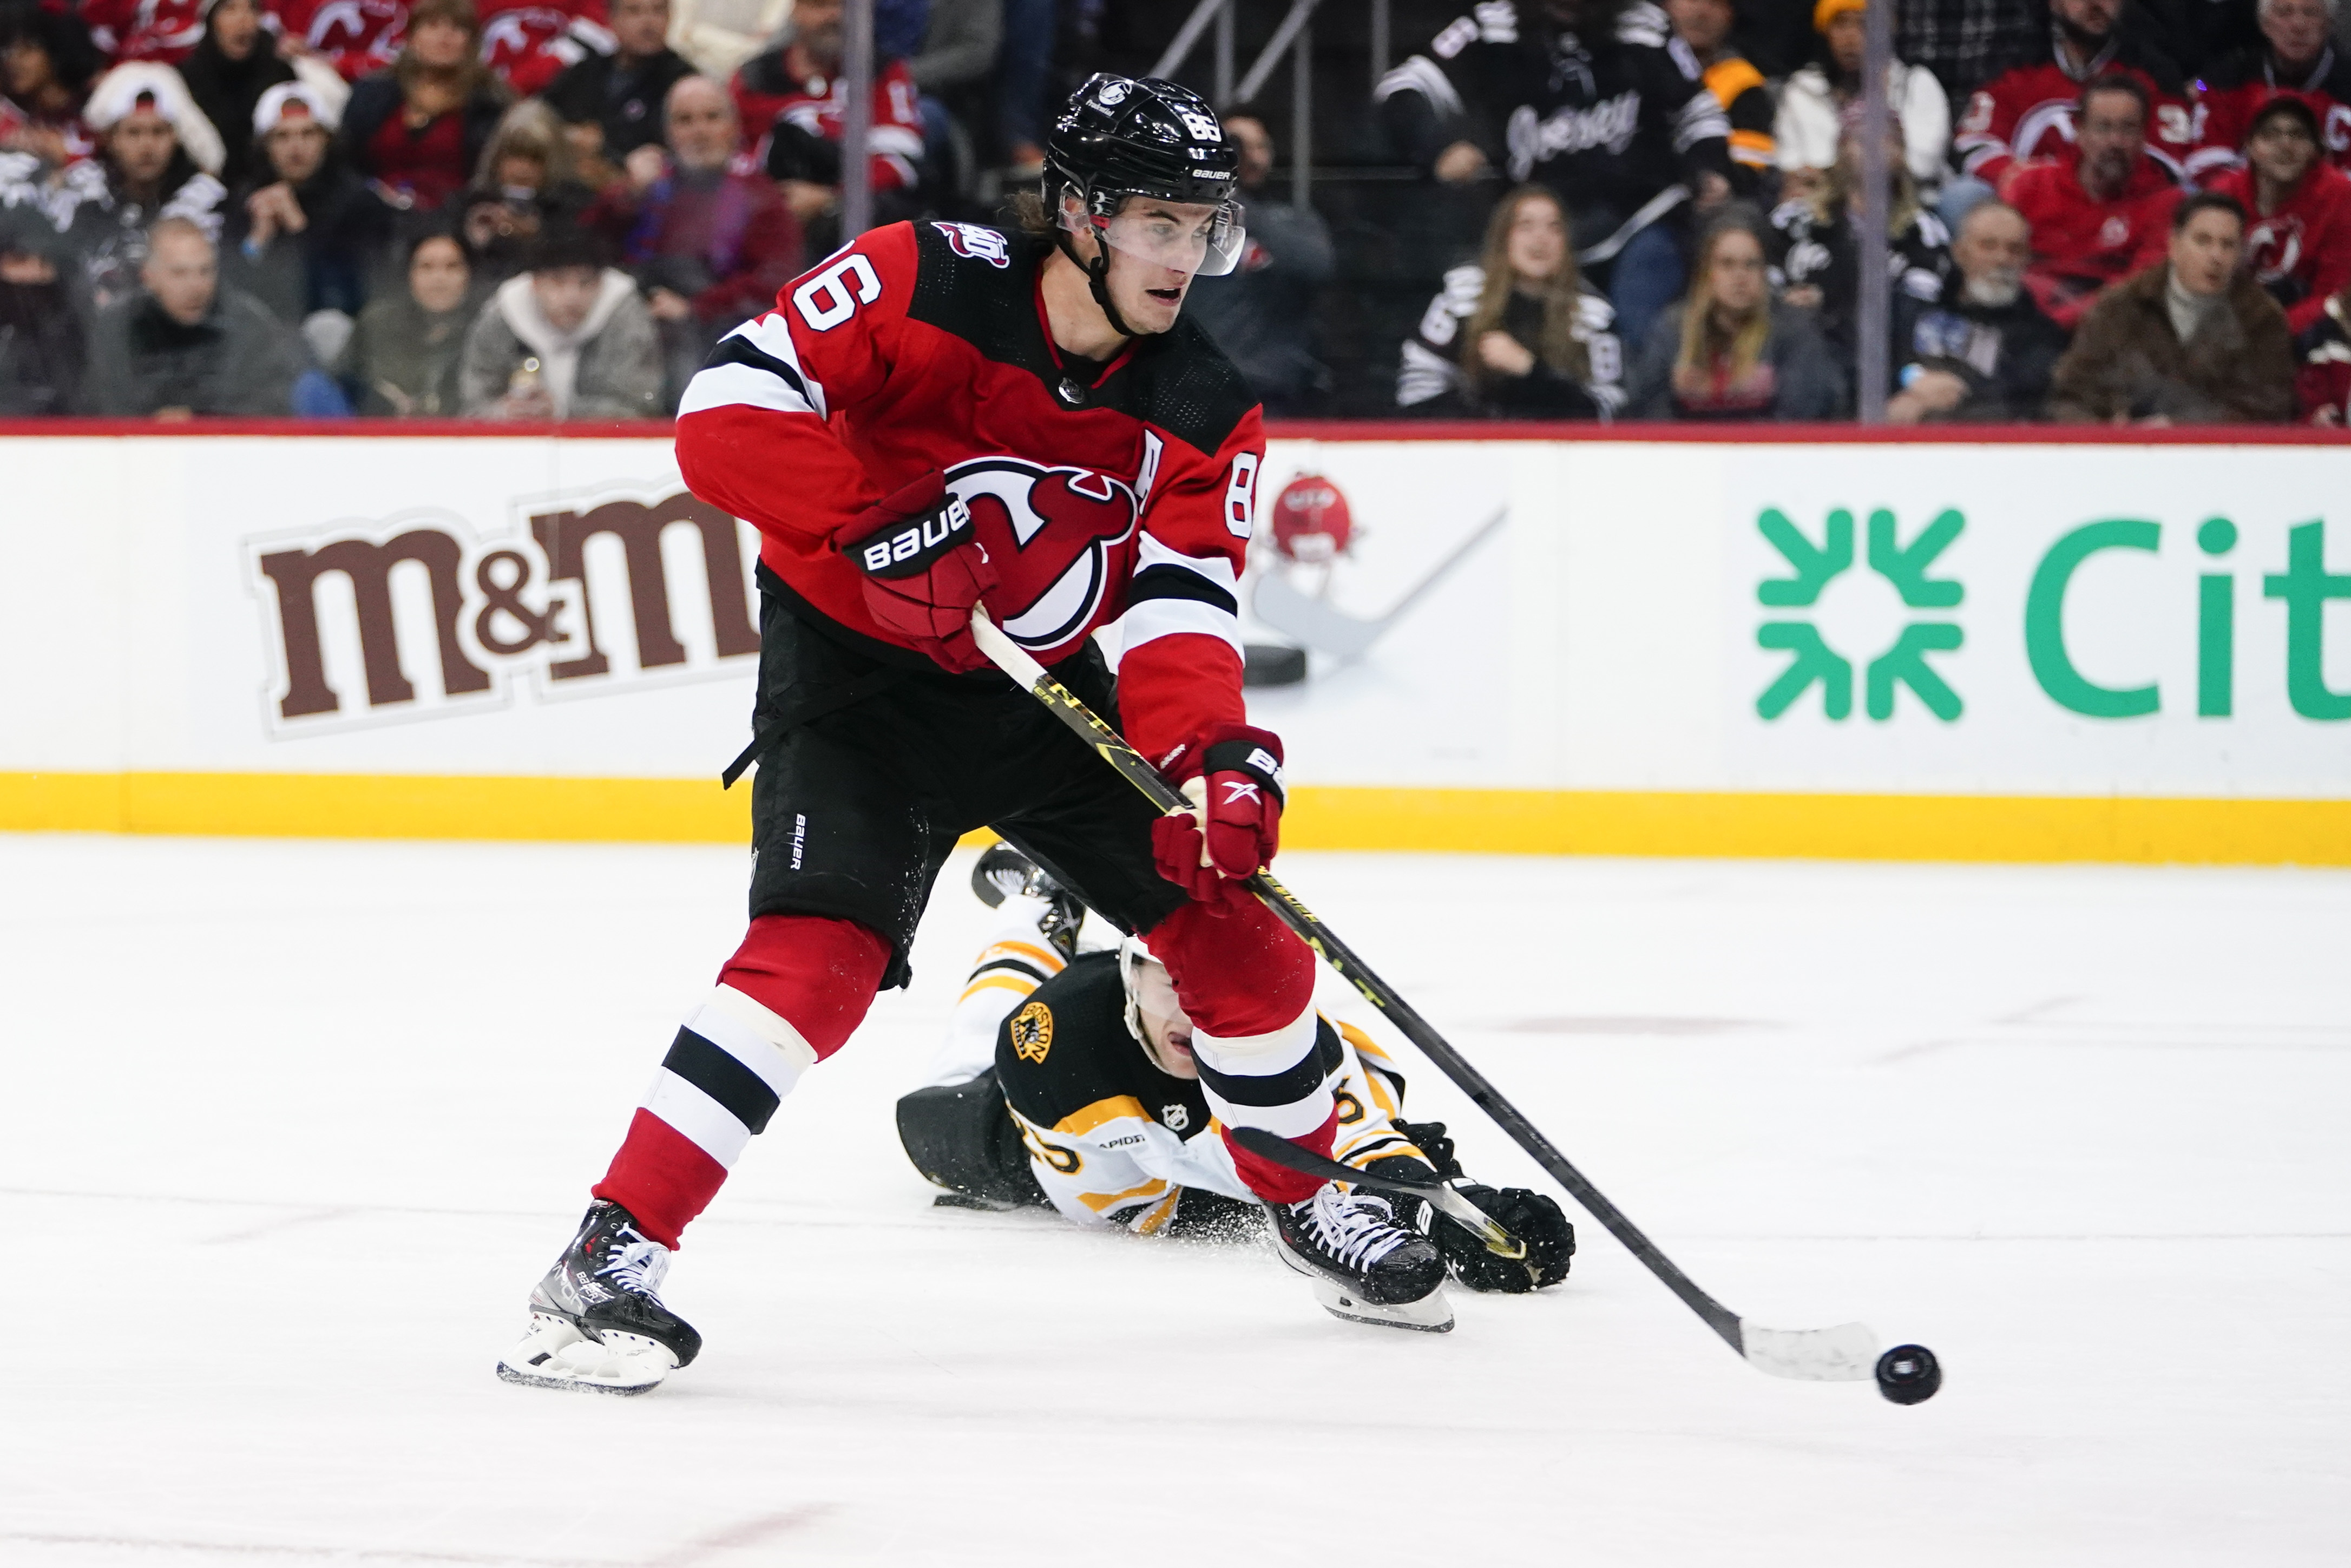 How to watch Devils Jack Hughes at NHL All-Star weekend Free live stream, time, TV, channel for 2023 NHL All-Star Game, Skills Competition